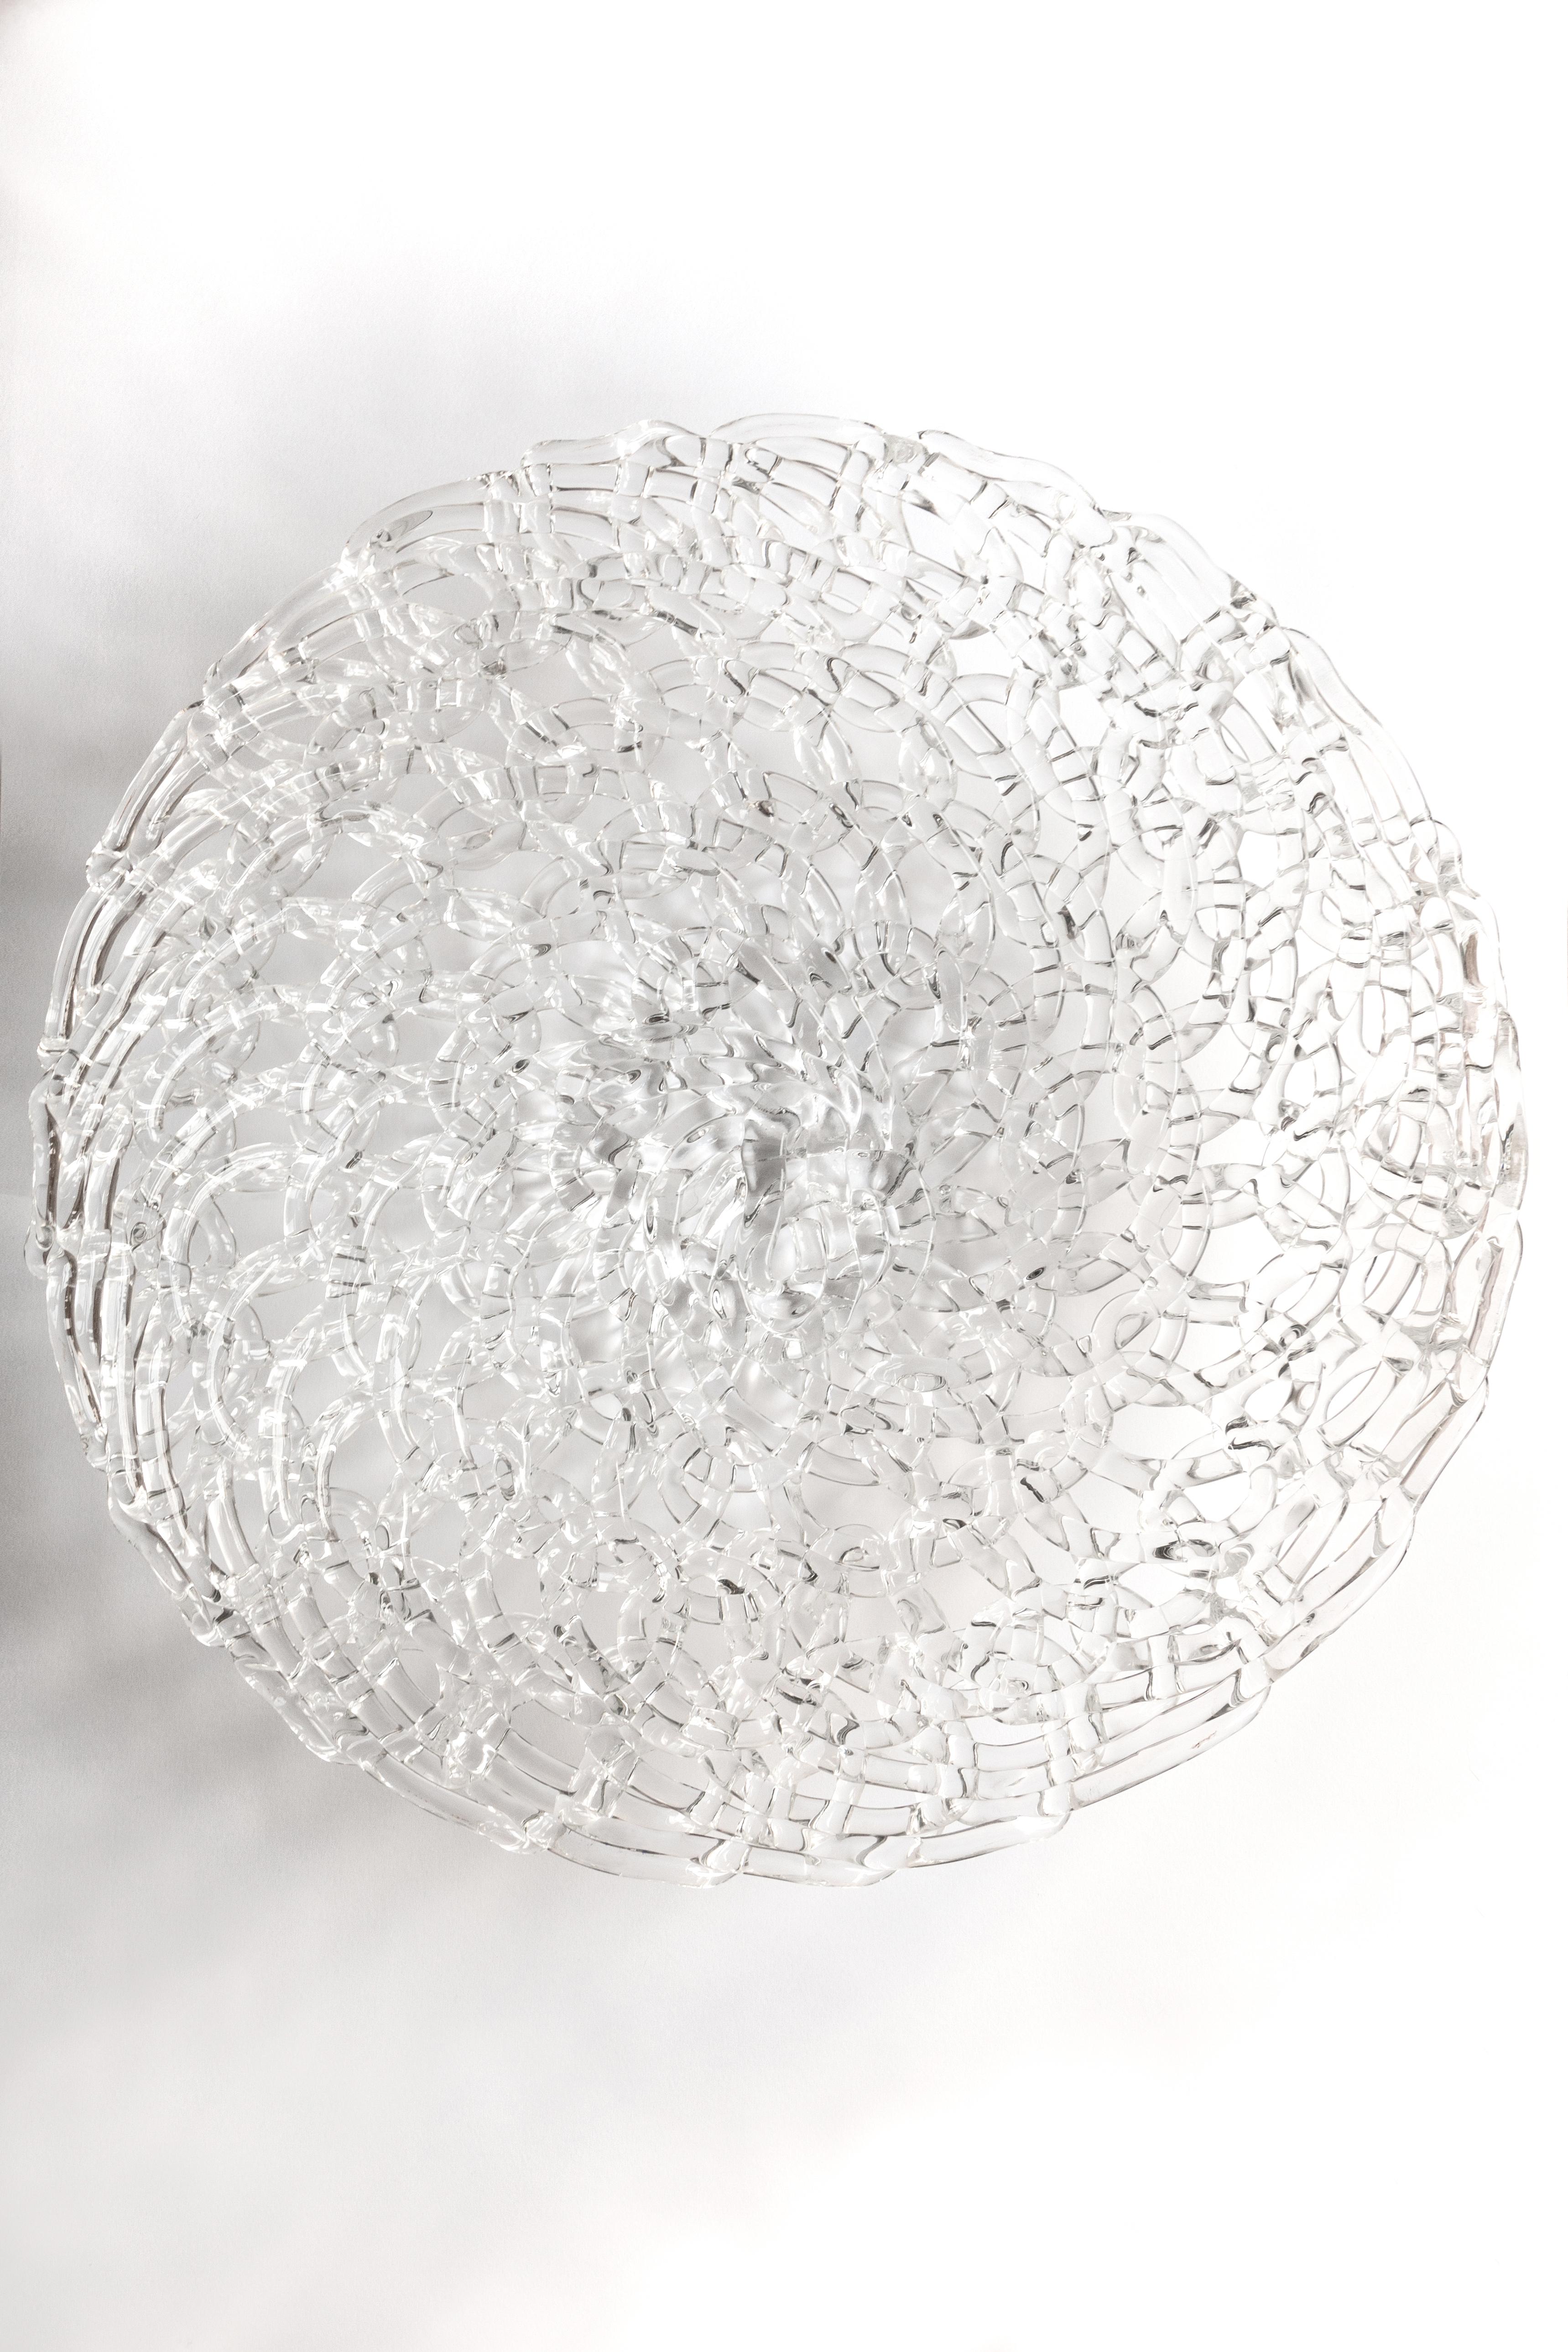 Is a centerpiece,
Is a fruit holder,

Is a single piece of glass,
cast, hand embroidered,

It's an invention, it's a sculpture,
takes the light and breaks it into a thousand pieces,
it is an object that furnishes captivating the eyes.